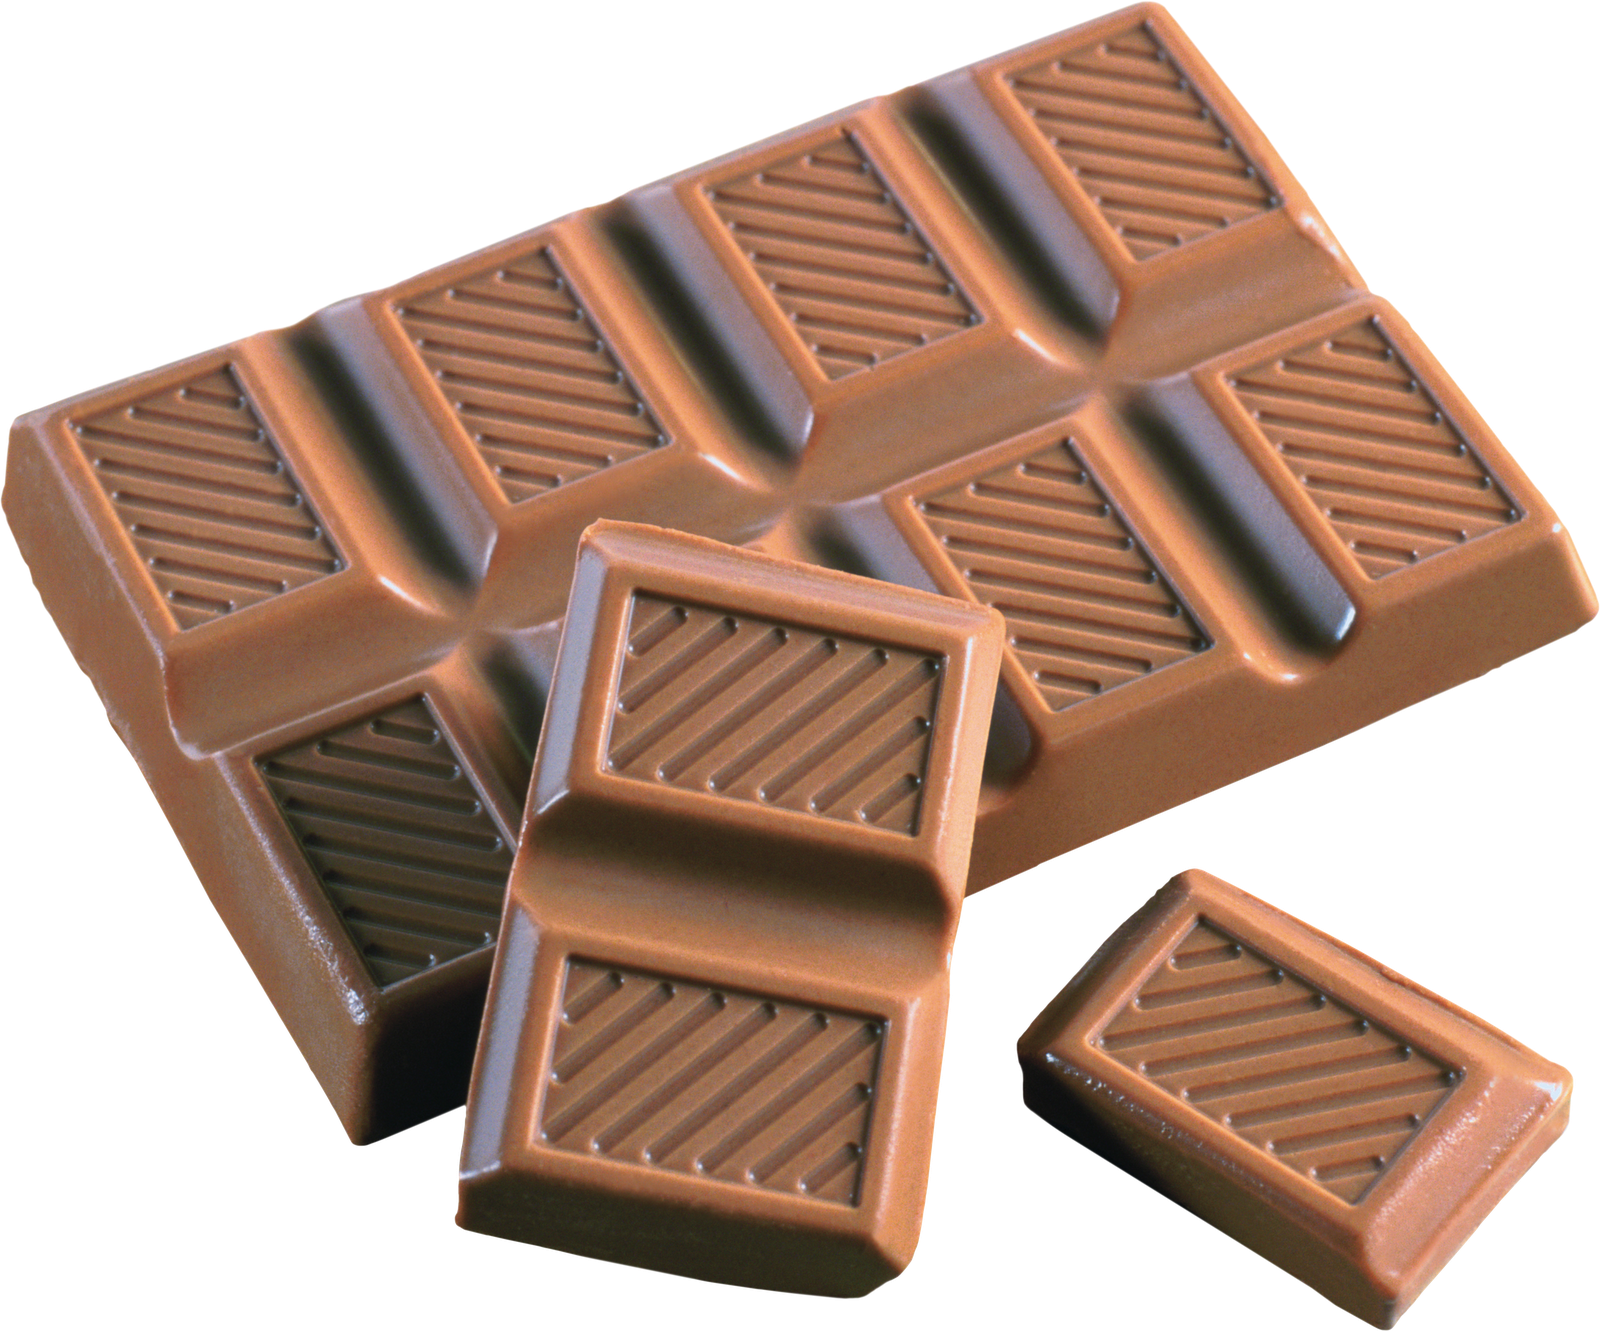 Download Chocolate Png Image For Free